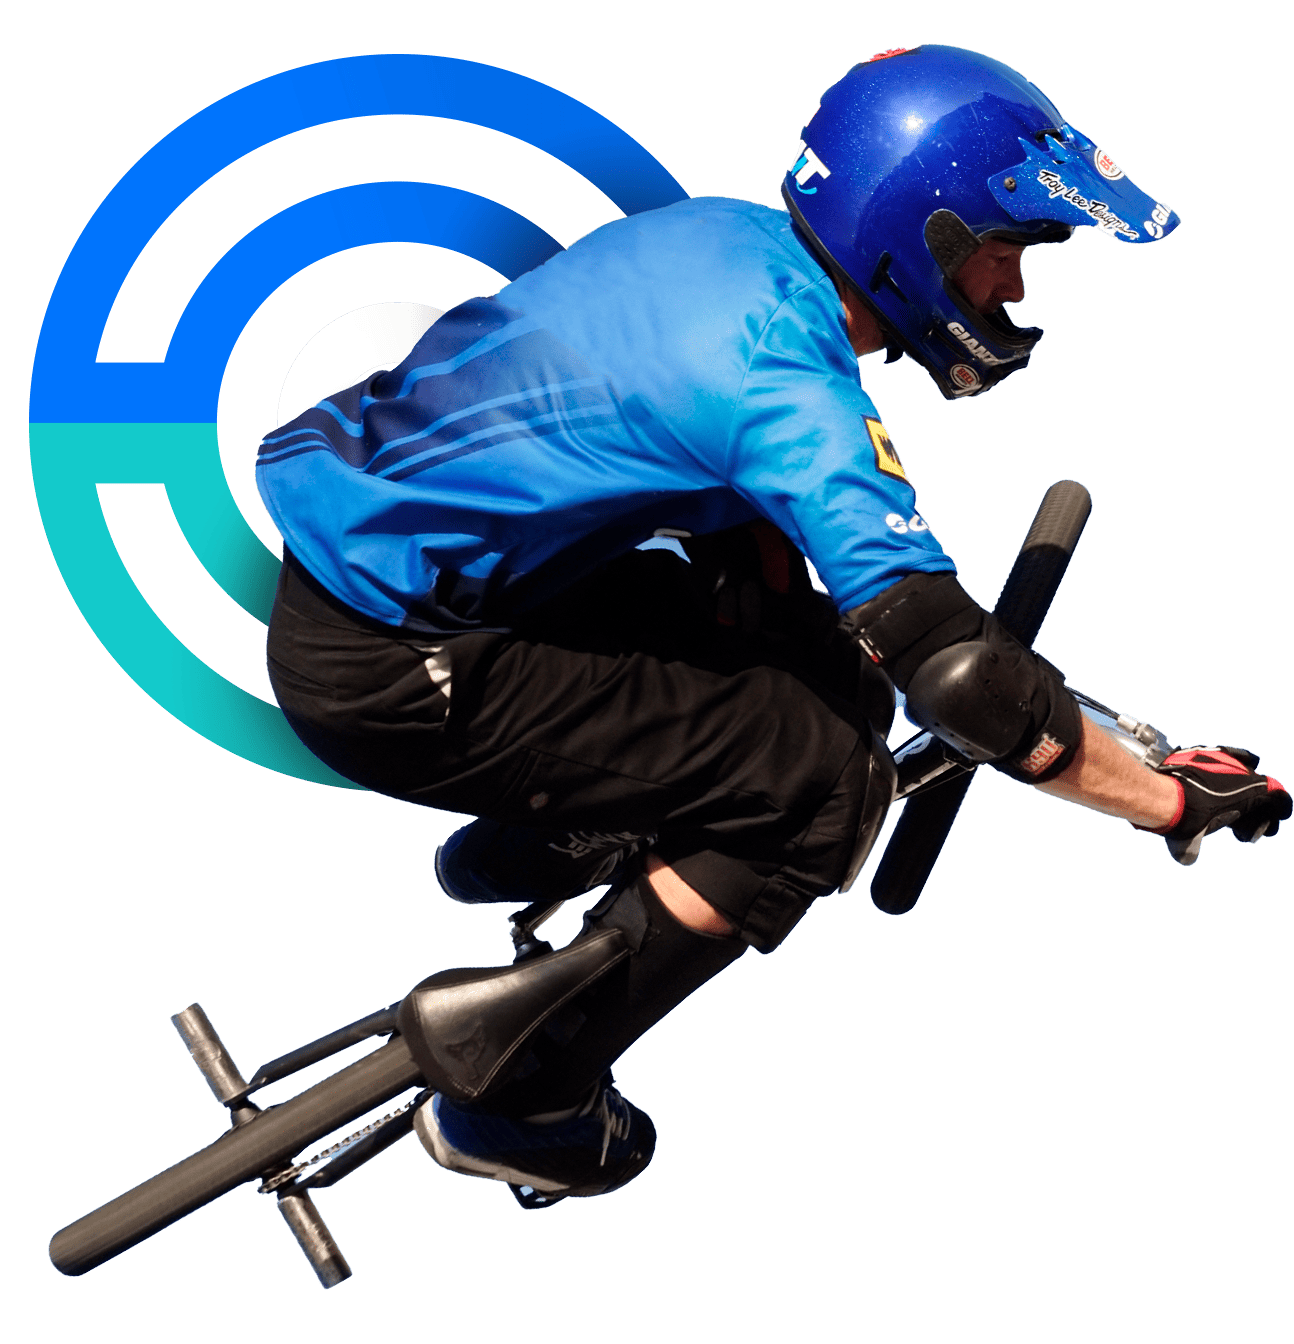 In the image, a male cyclist is making stunts with his BMX. His helmet and clothing are blue. He is wearing the characteristic protection of the discipline.